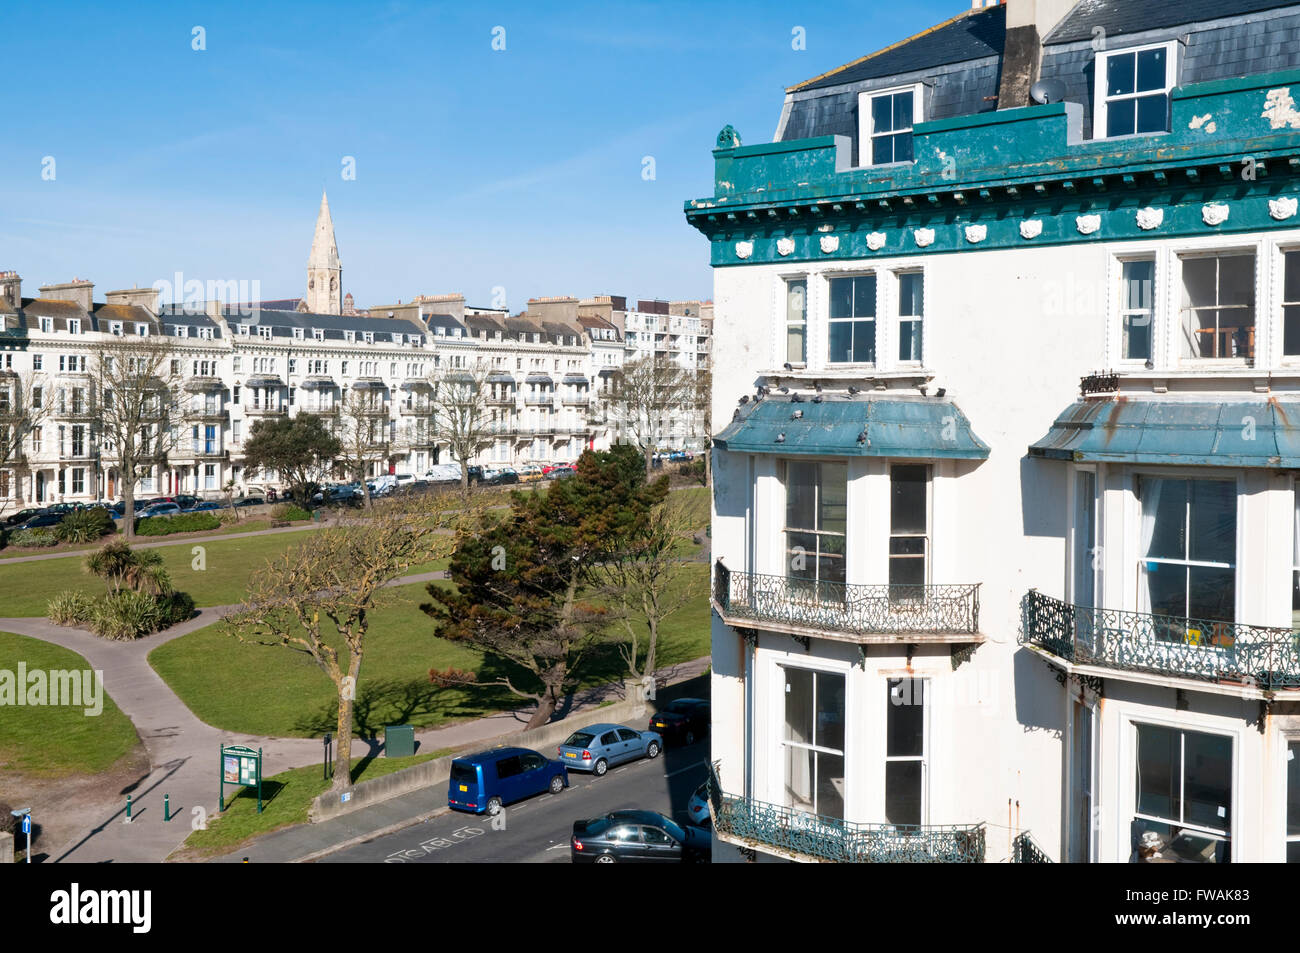 Apartment buildings overlooking the park at Warrior Square, St Leonards-on-Sea, East Sussex on the south coast of England Stock Photo